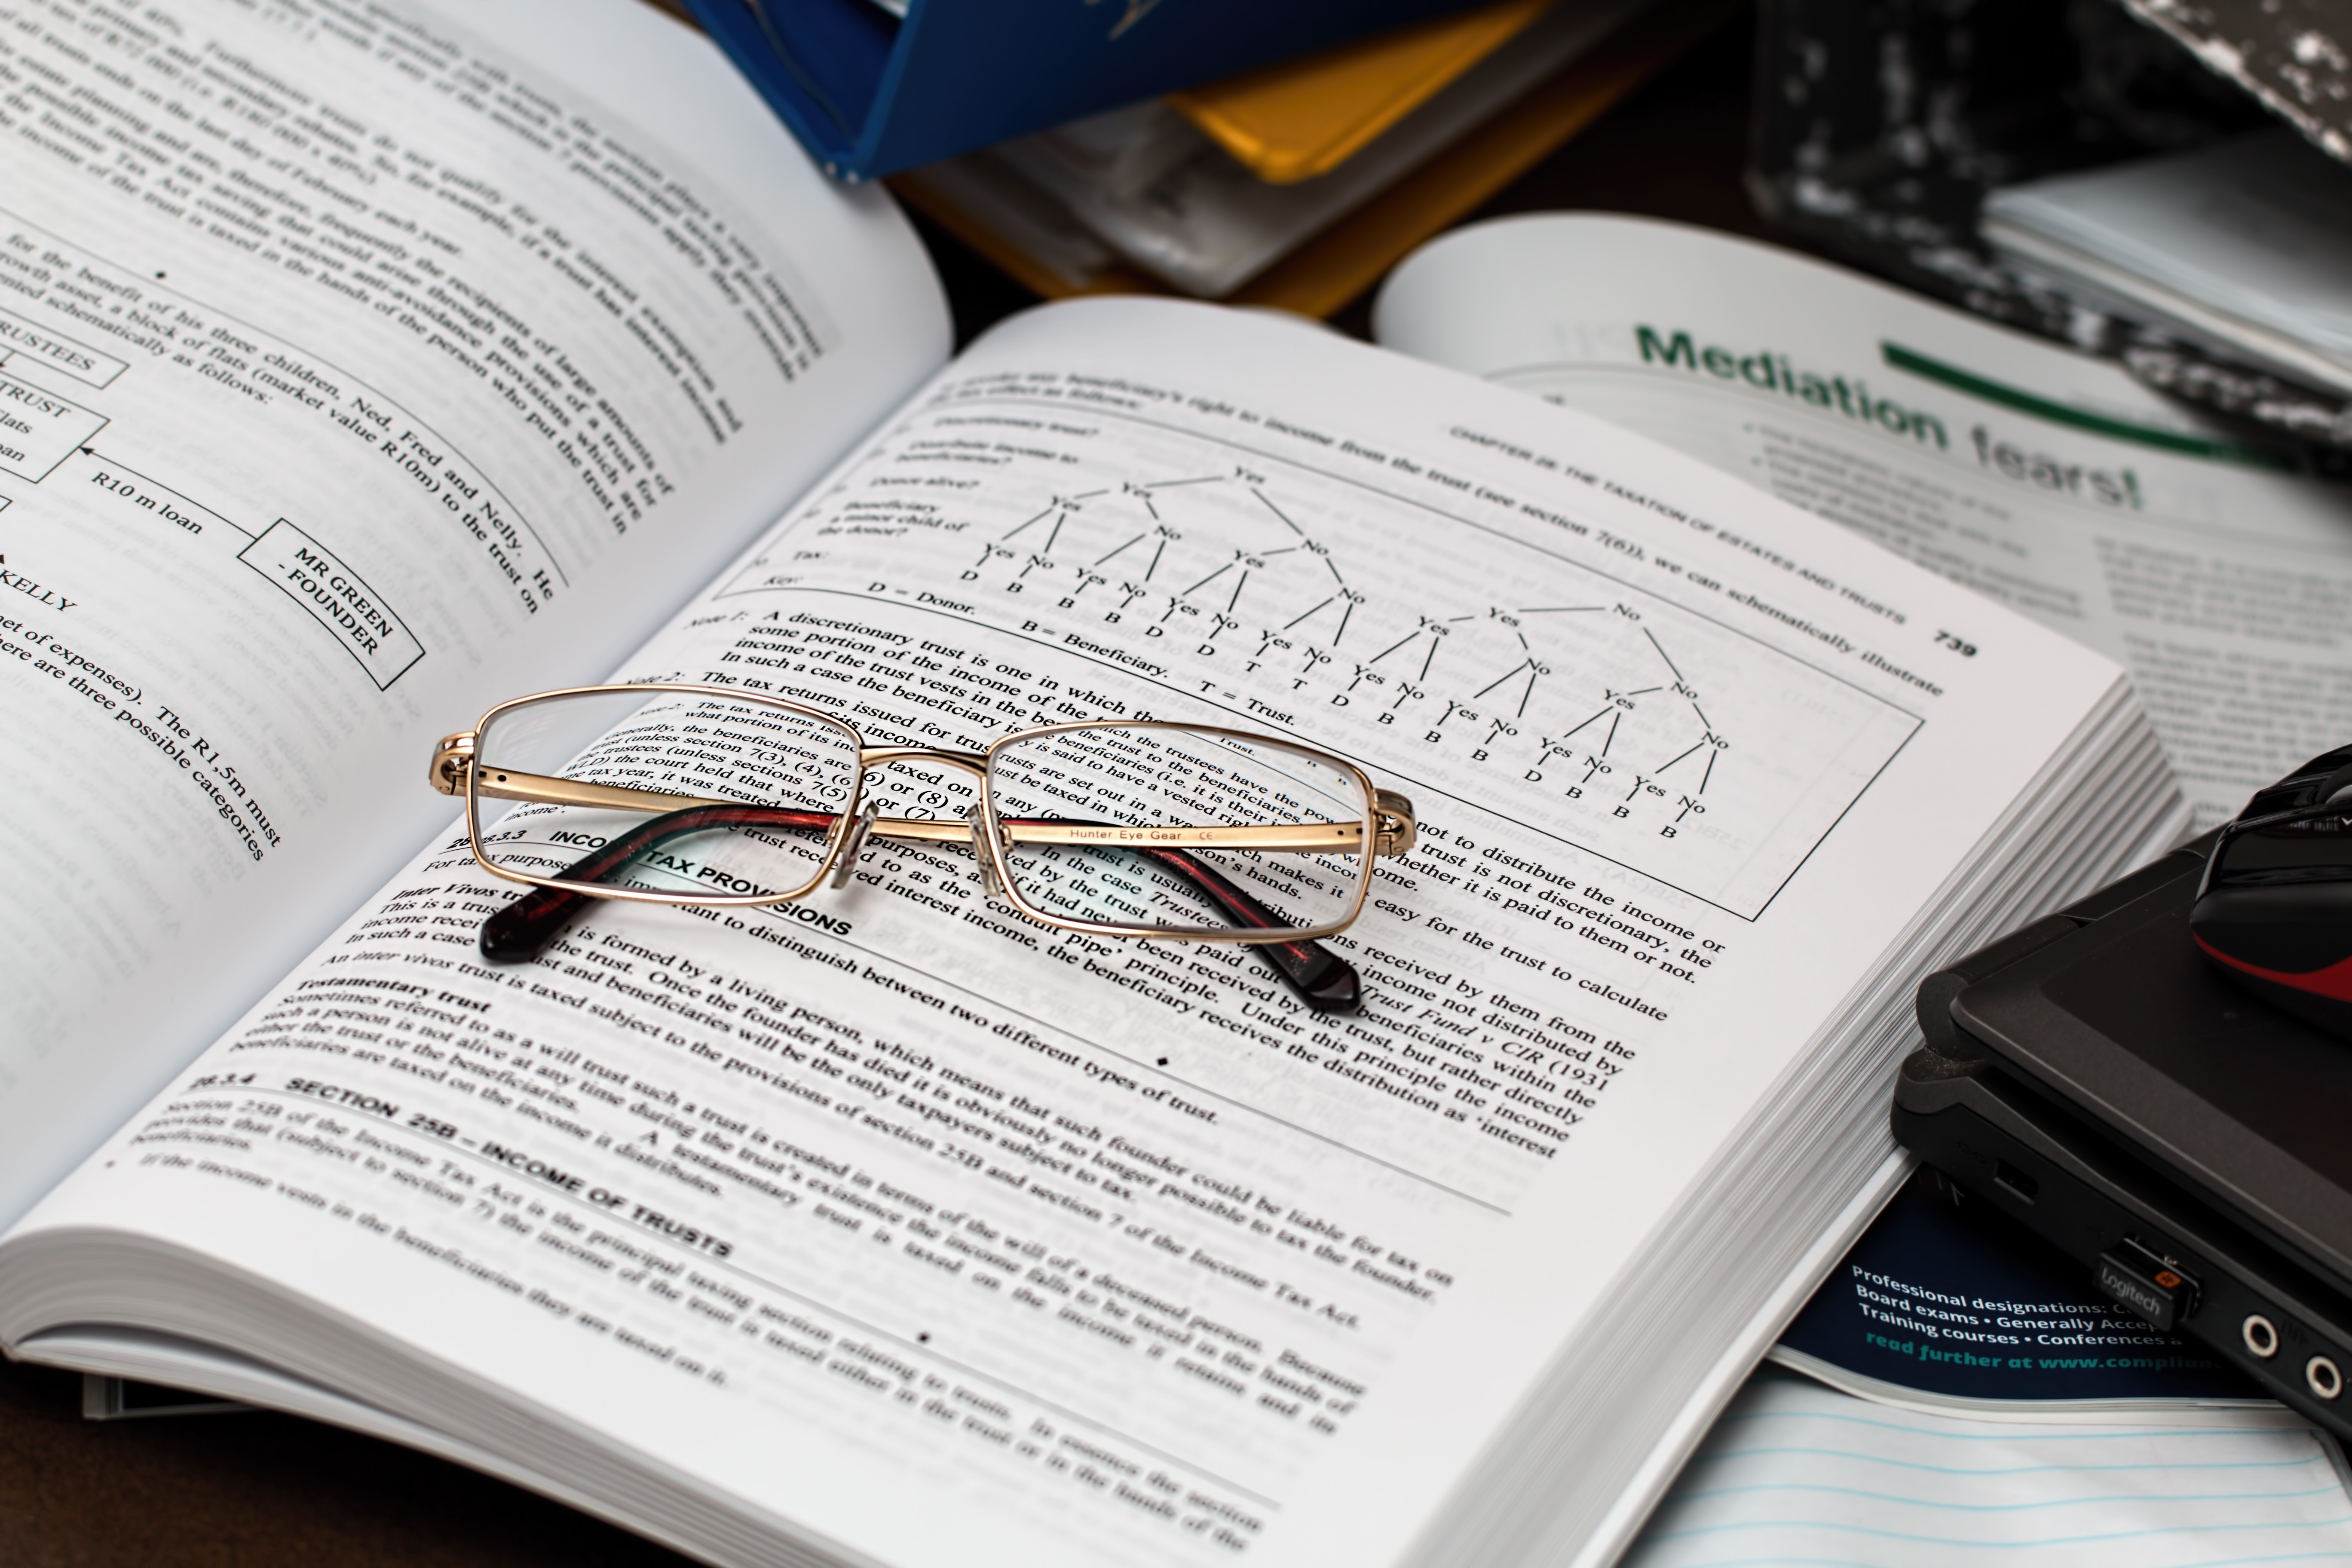 A pair of glasses on an open research book